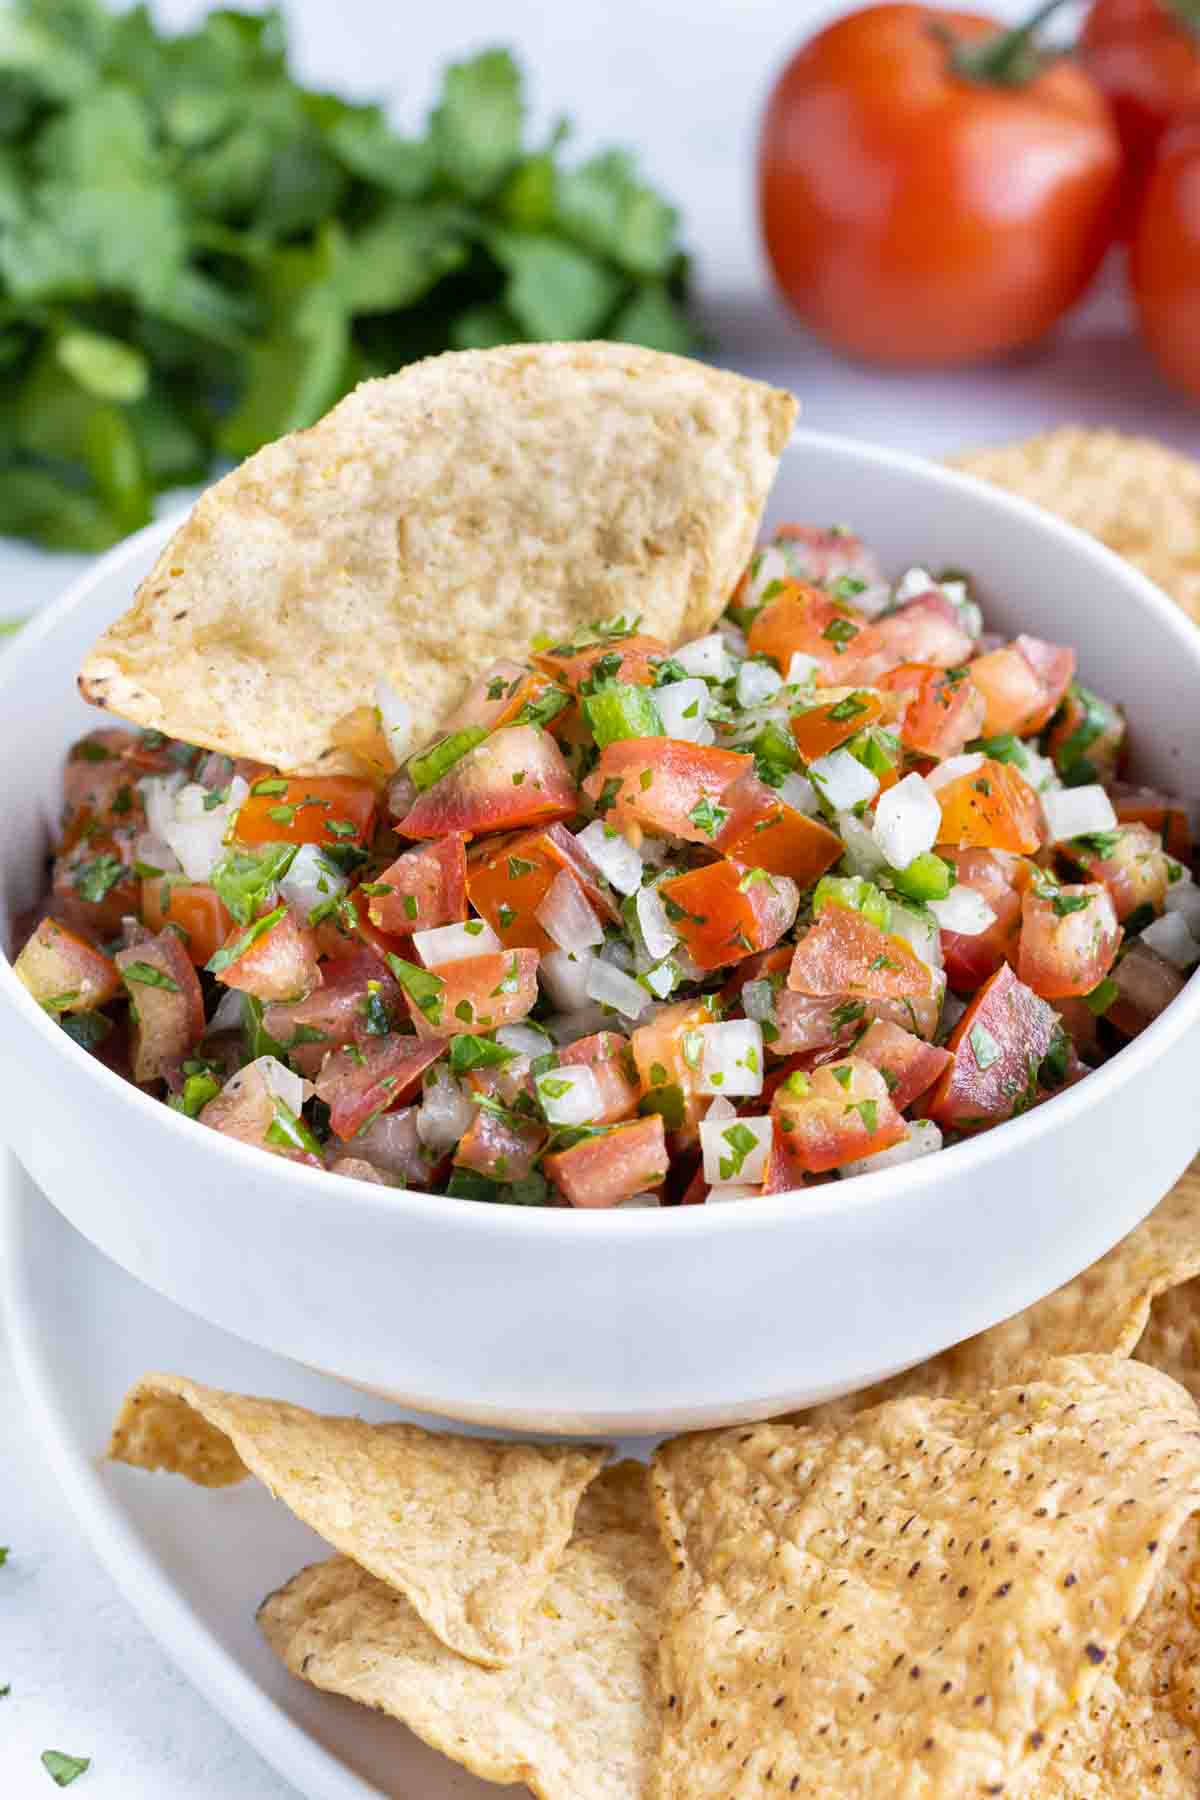 Chips are served along side a bowl of fresh and colorful pico.